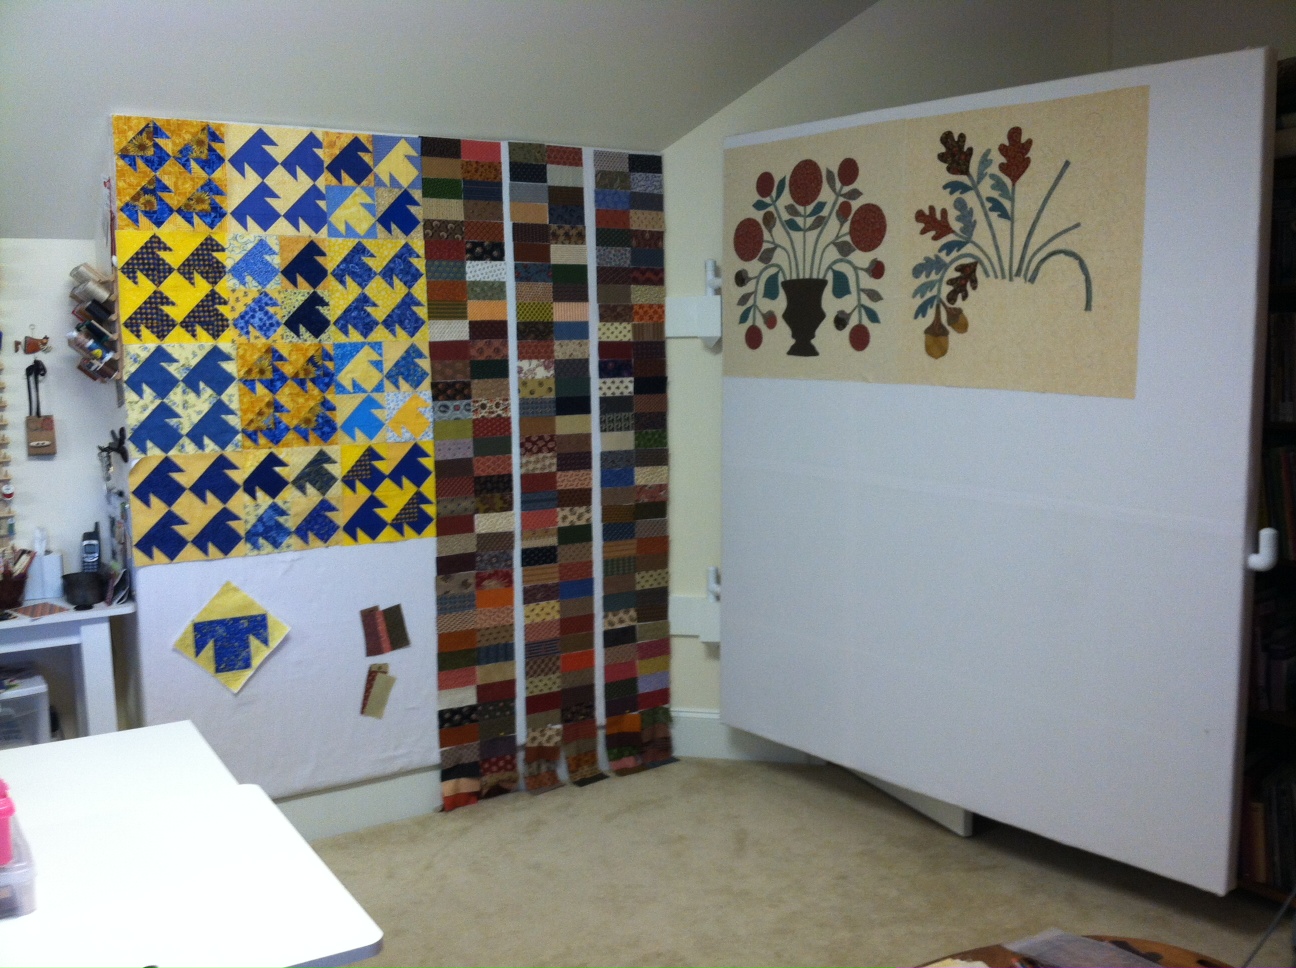 Grammy Quilts: An Awesome Hinged Design Wall Made by My Awesome Husband!